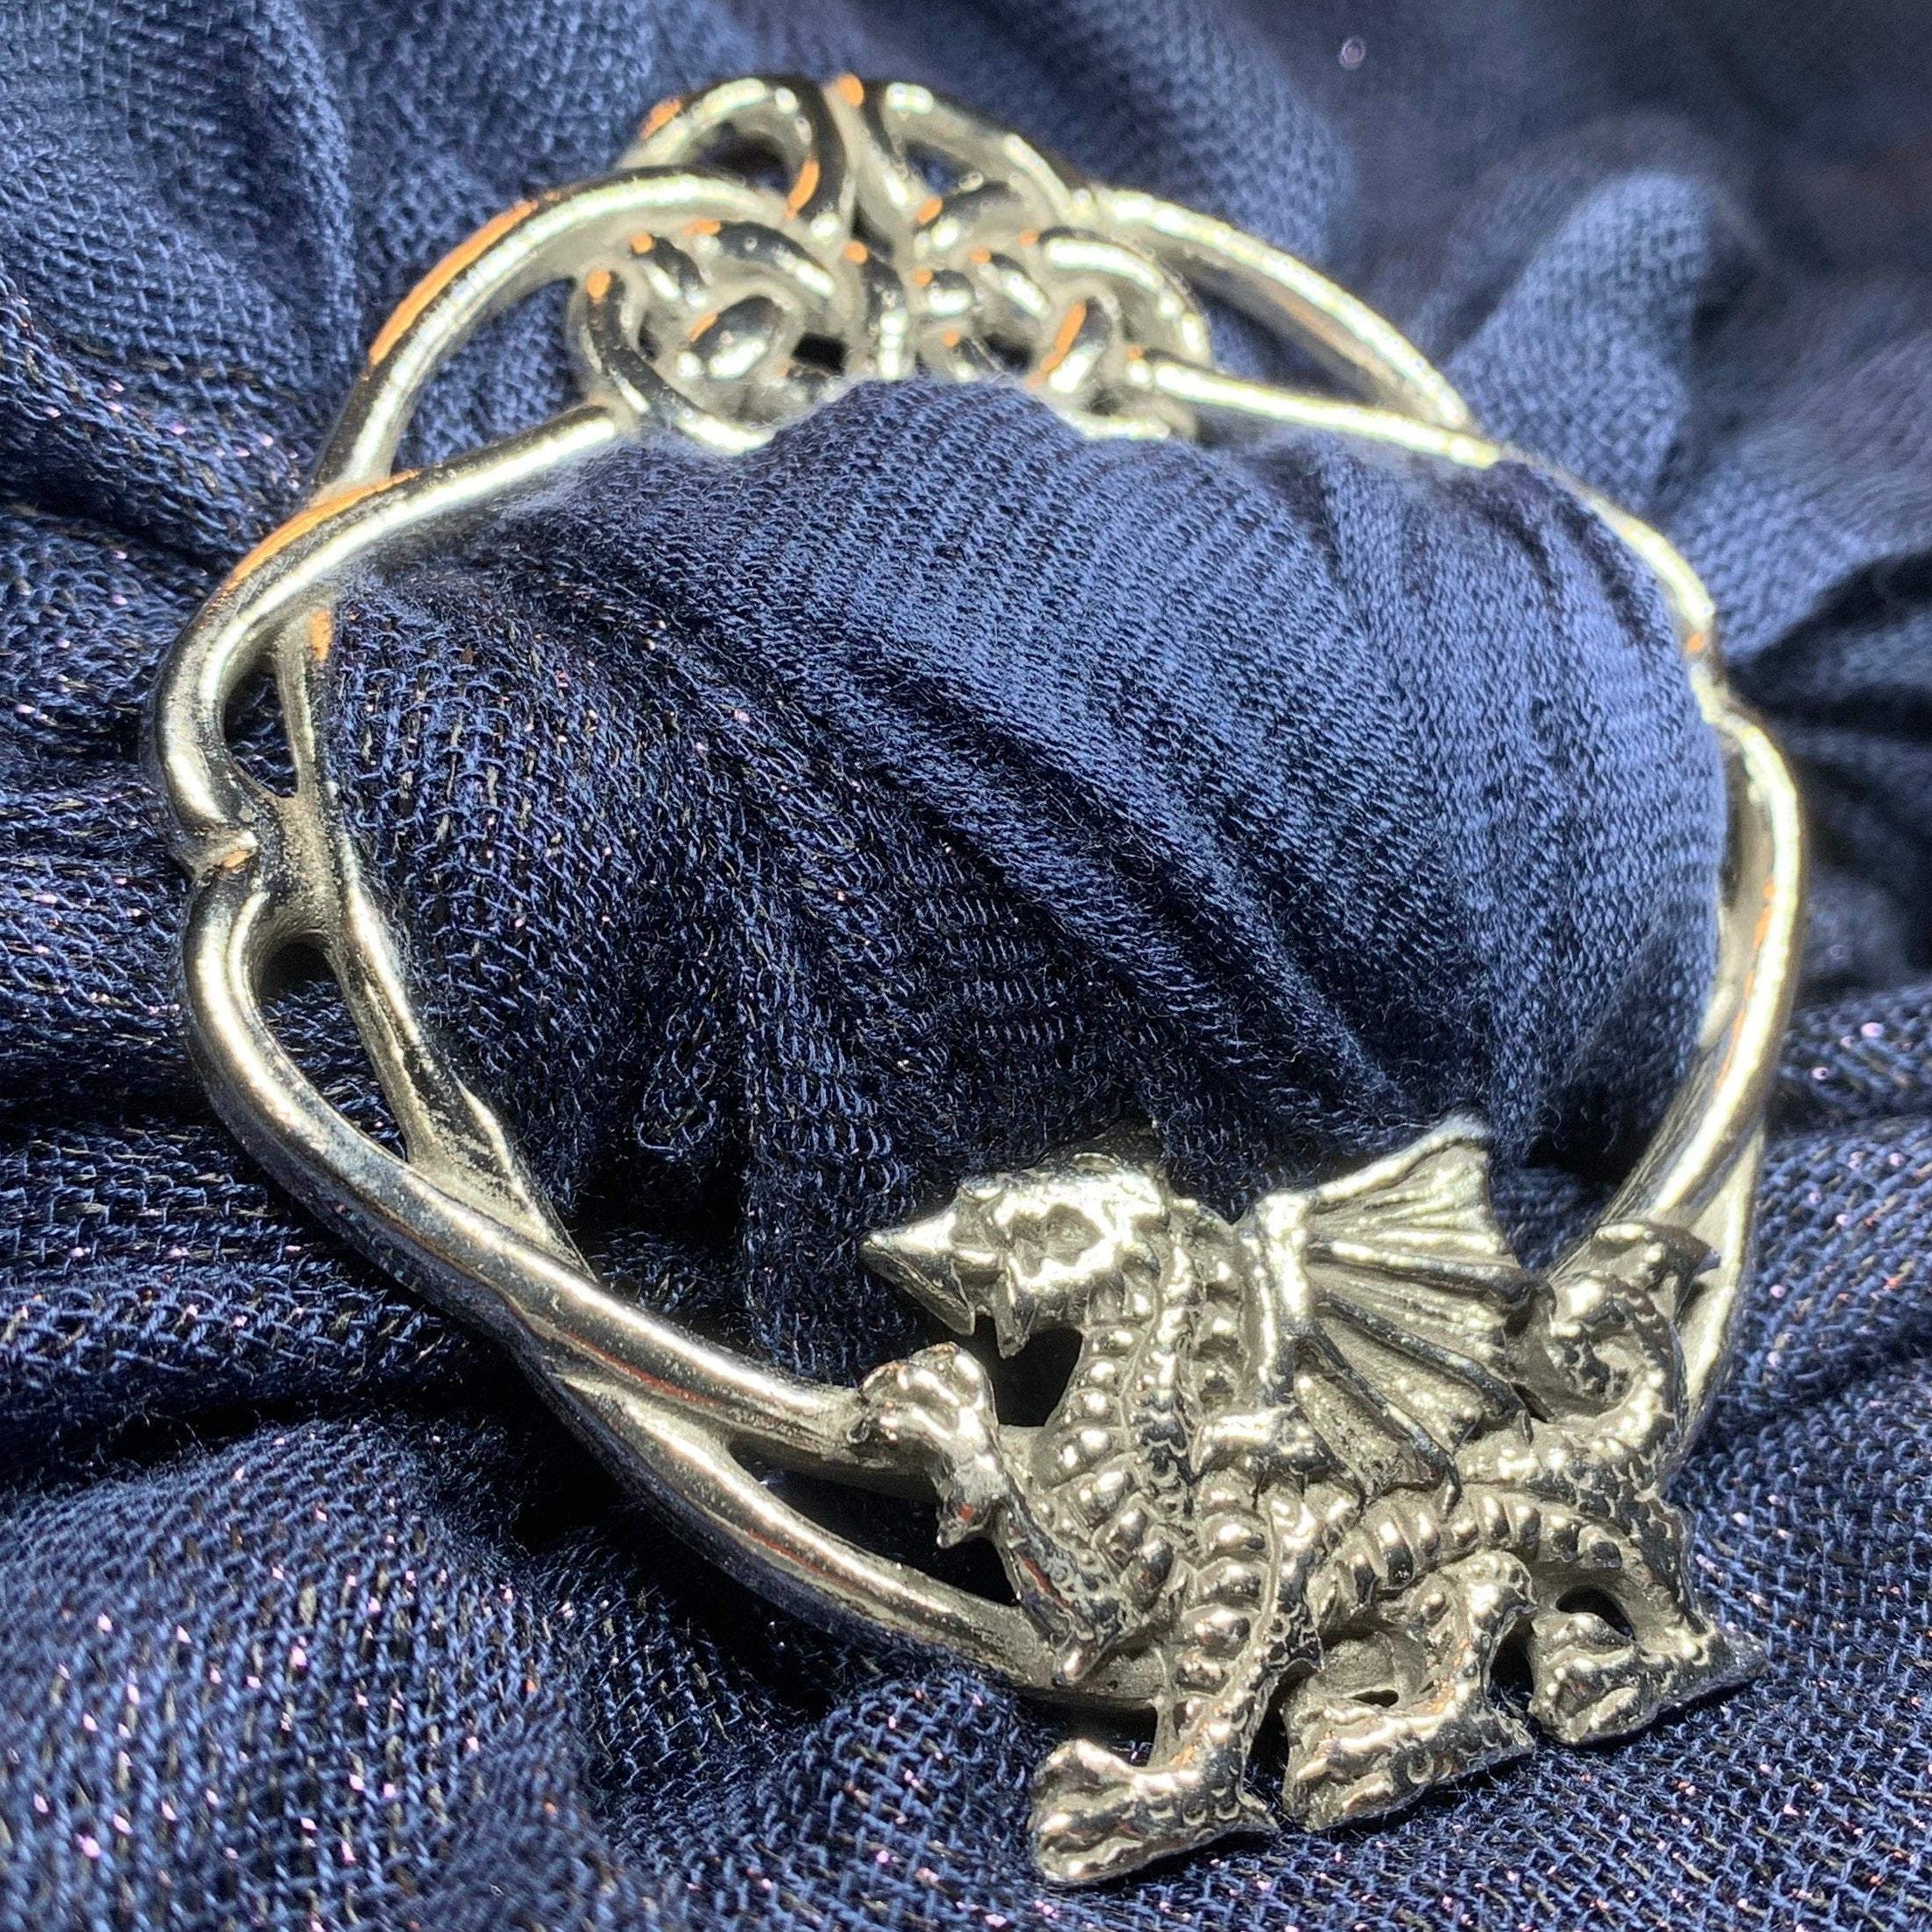 Thistle and Celtic Knot Pewter Scarf Ring (Medium) – The Celtic Knot